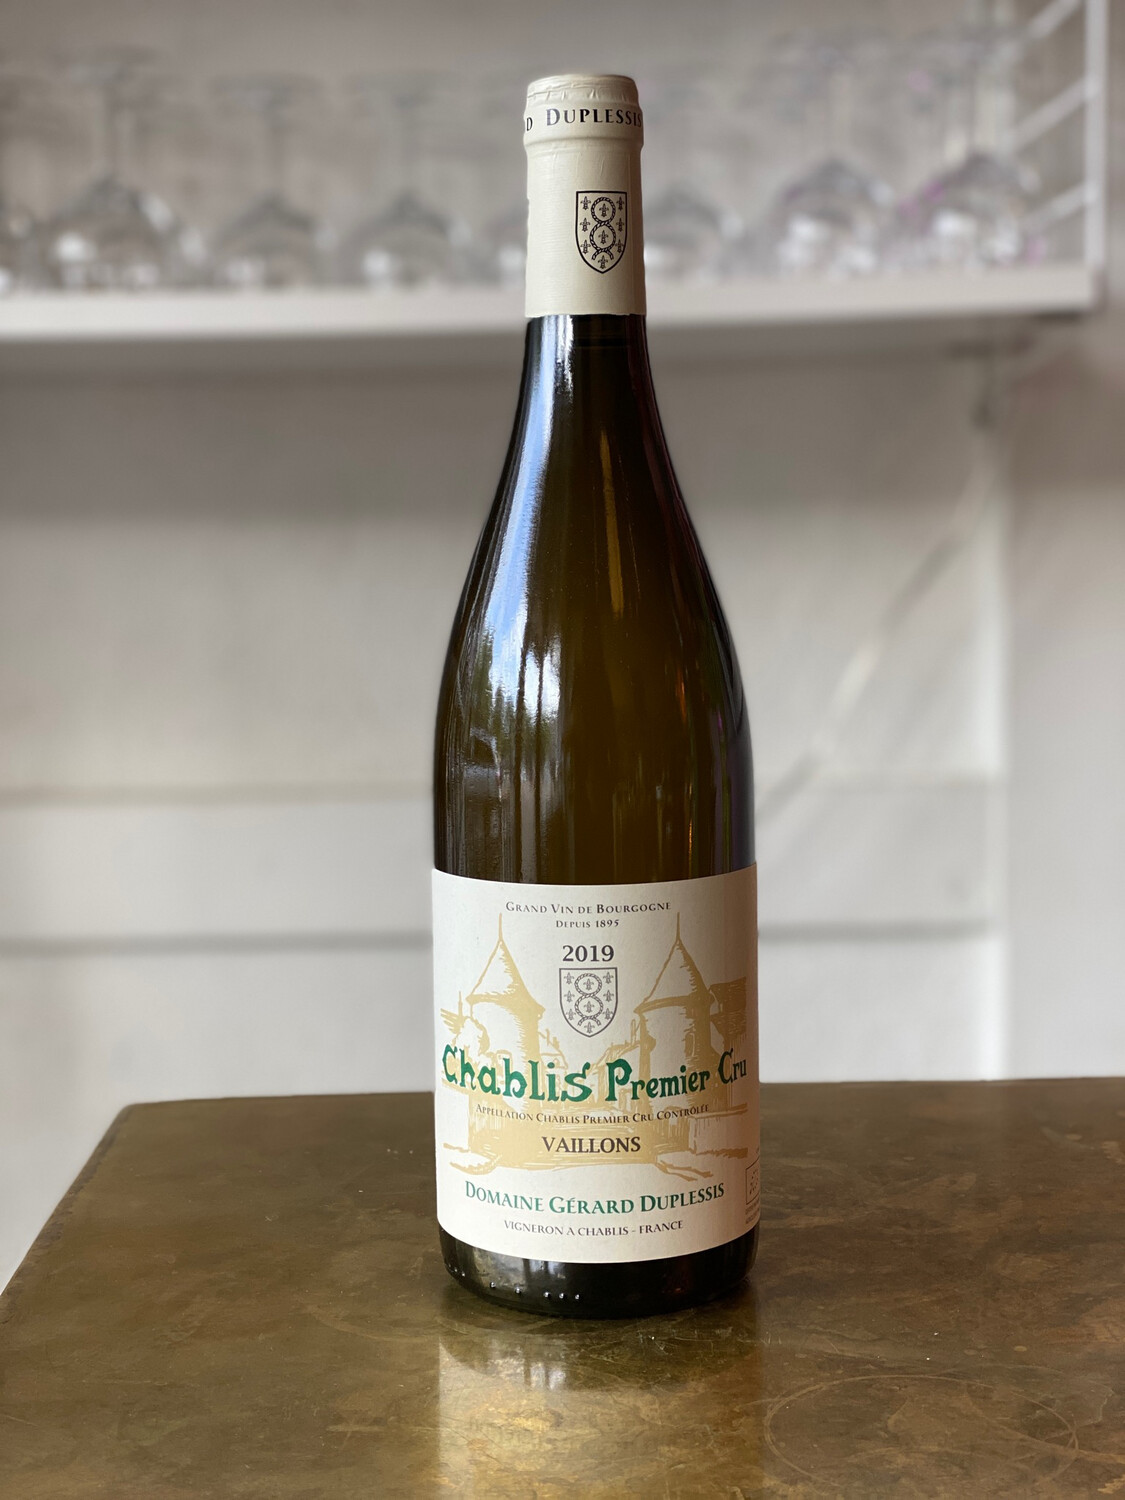 Domaine Gerard Duplessis 'Vaillons' 1er Cru Chablis (2019)